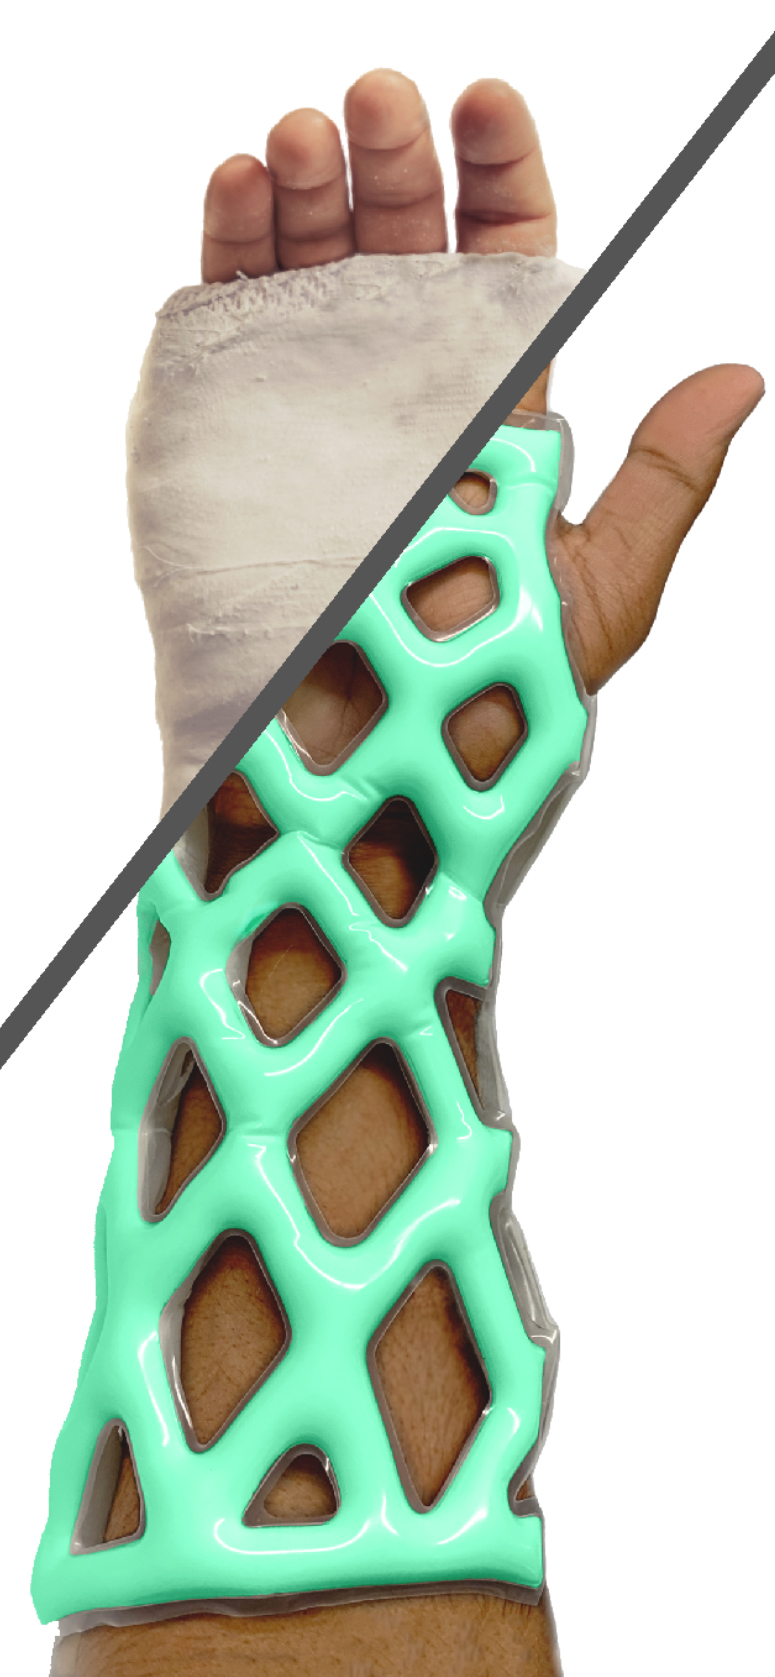 New mesh-type cast aims to replace plaster cast < Device/ICT < Article - KBR